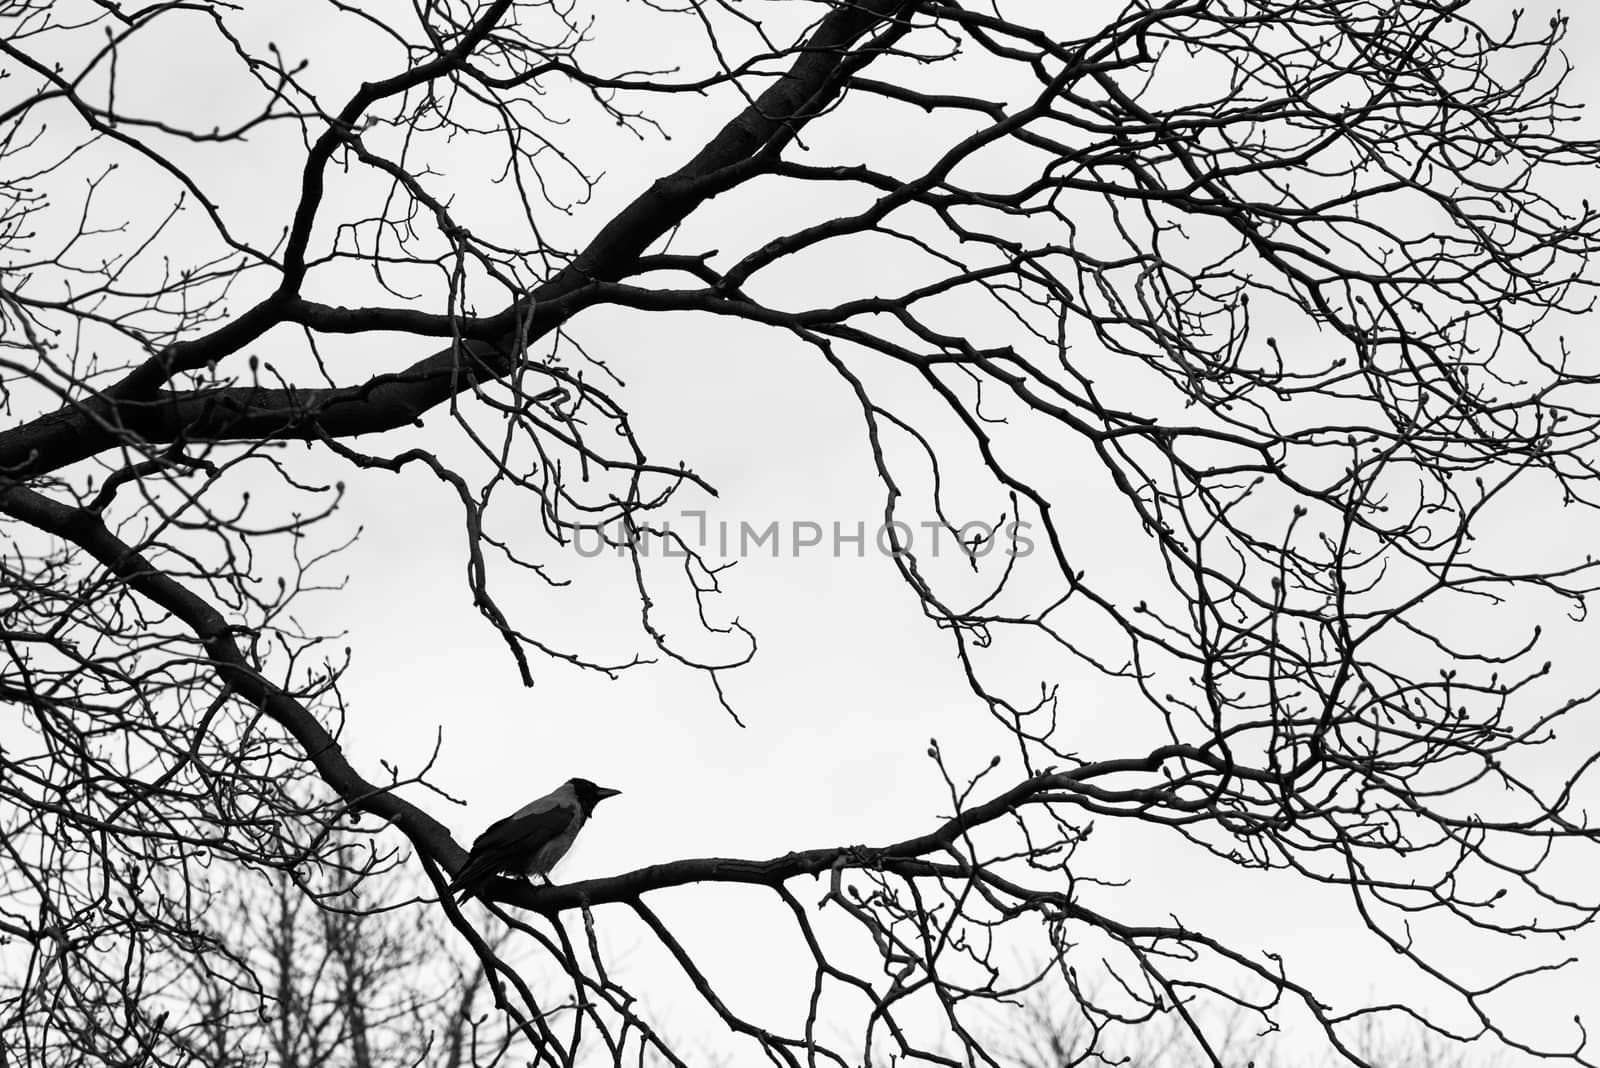 Crows  on tree branches. Black and white by skrotov